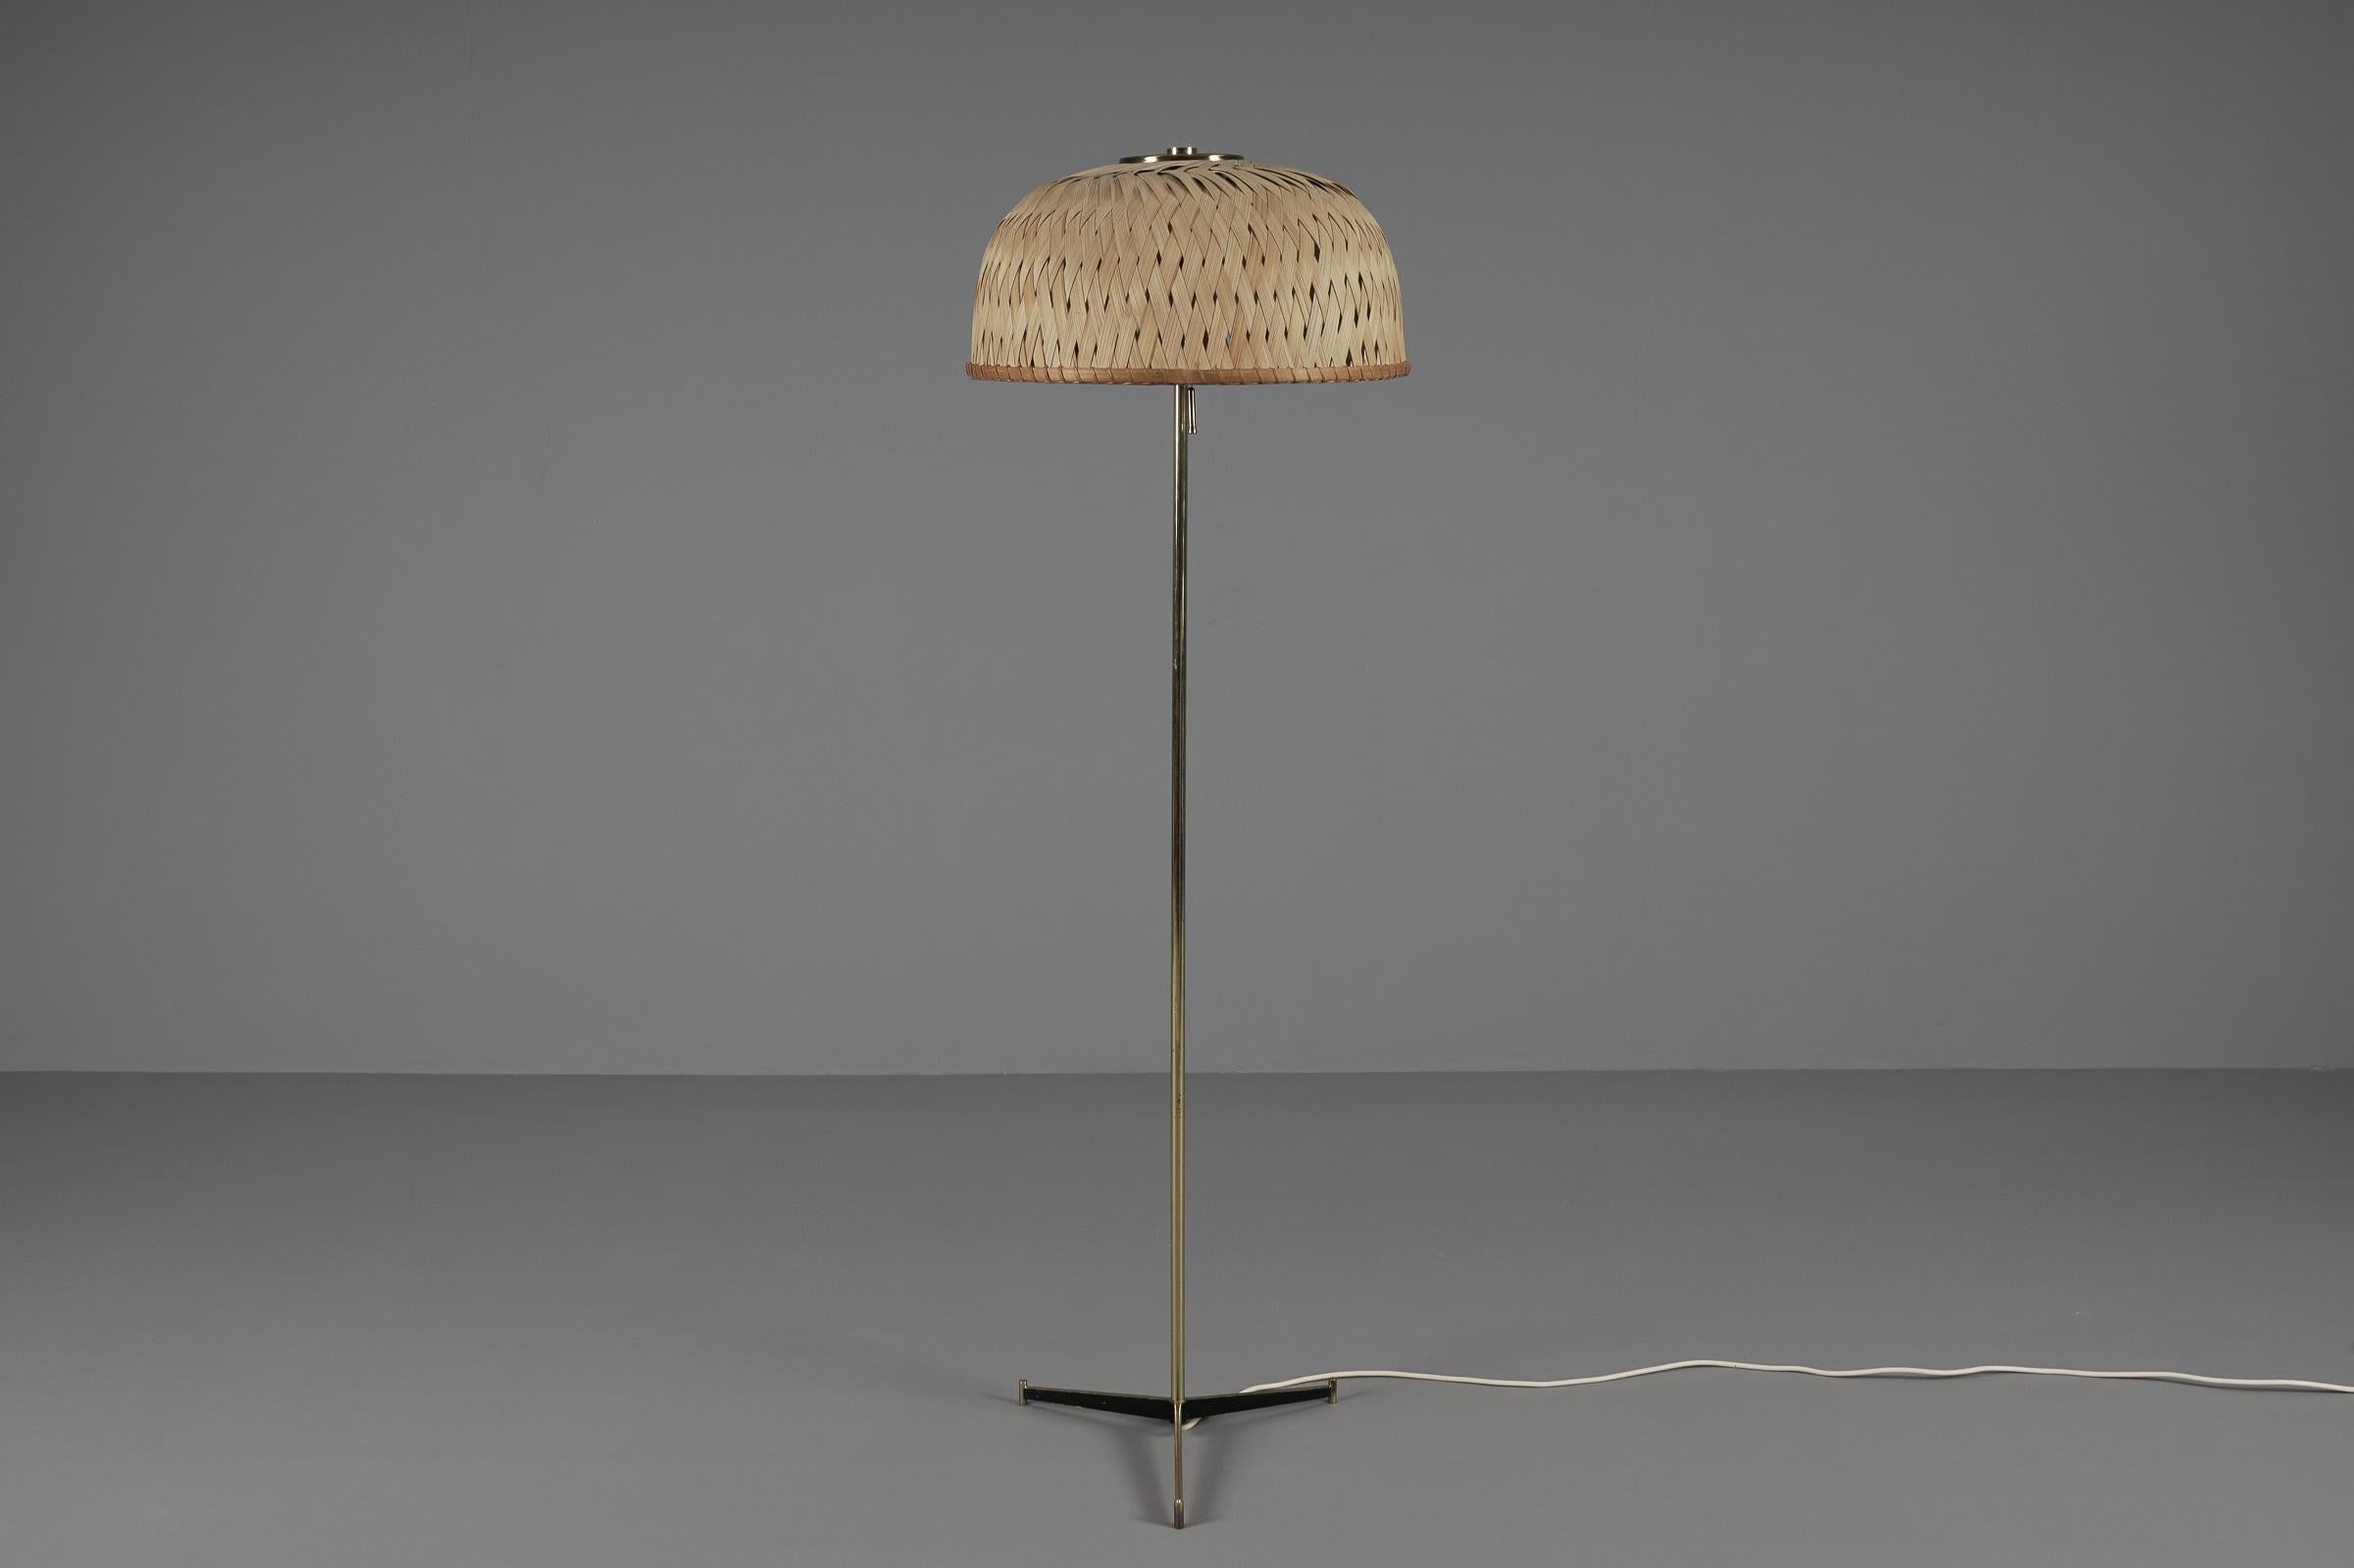 Mid-20th Century Tripod Floor Lamp in Brass and Wicker Shade, 1950s Italy For Sale